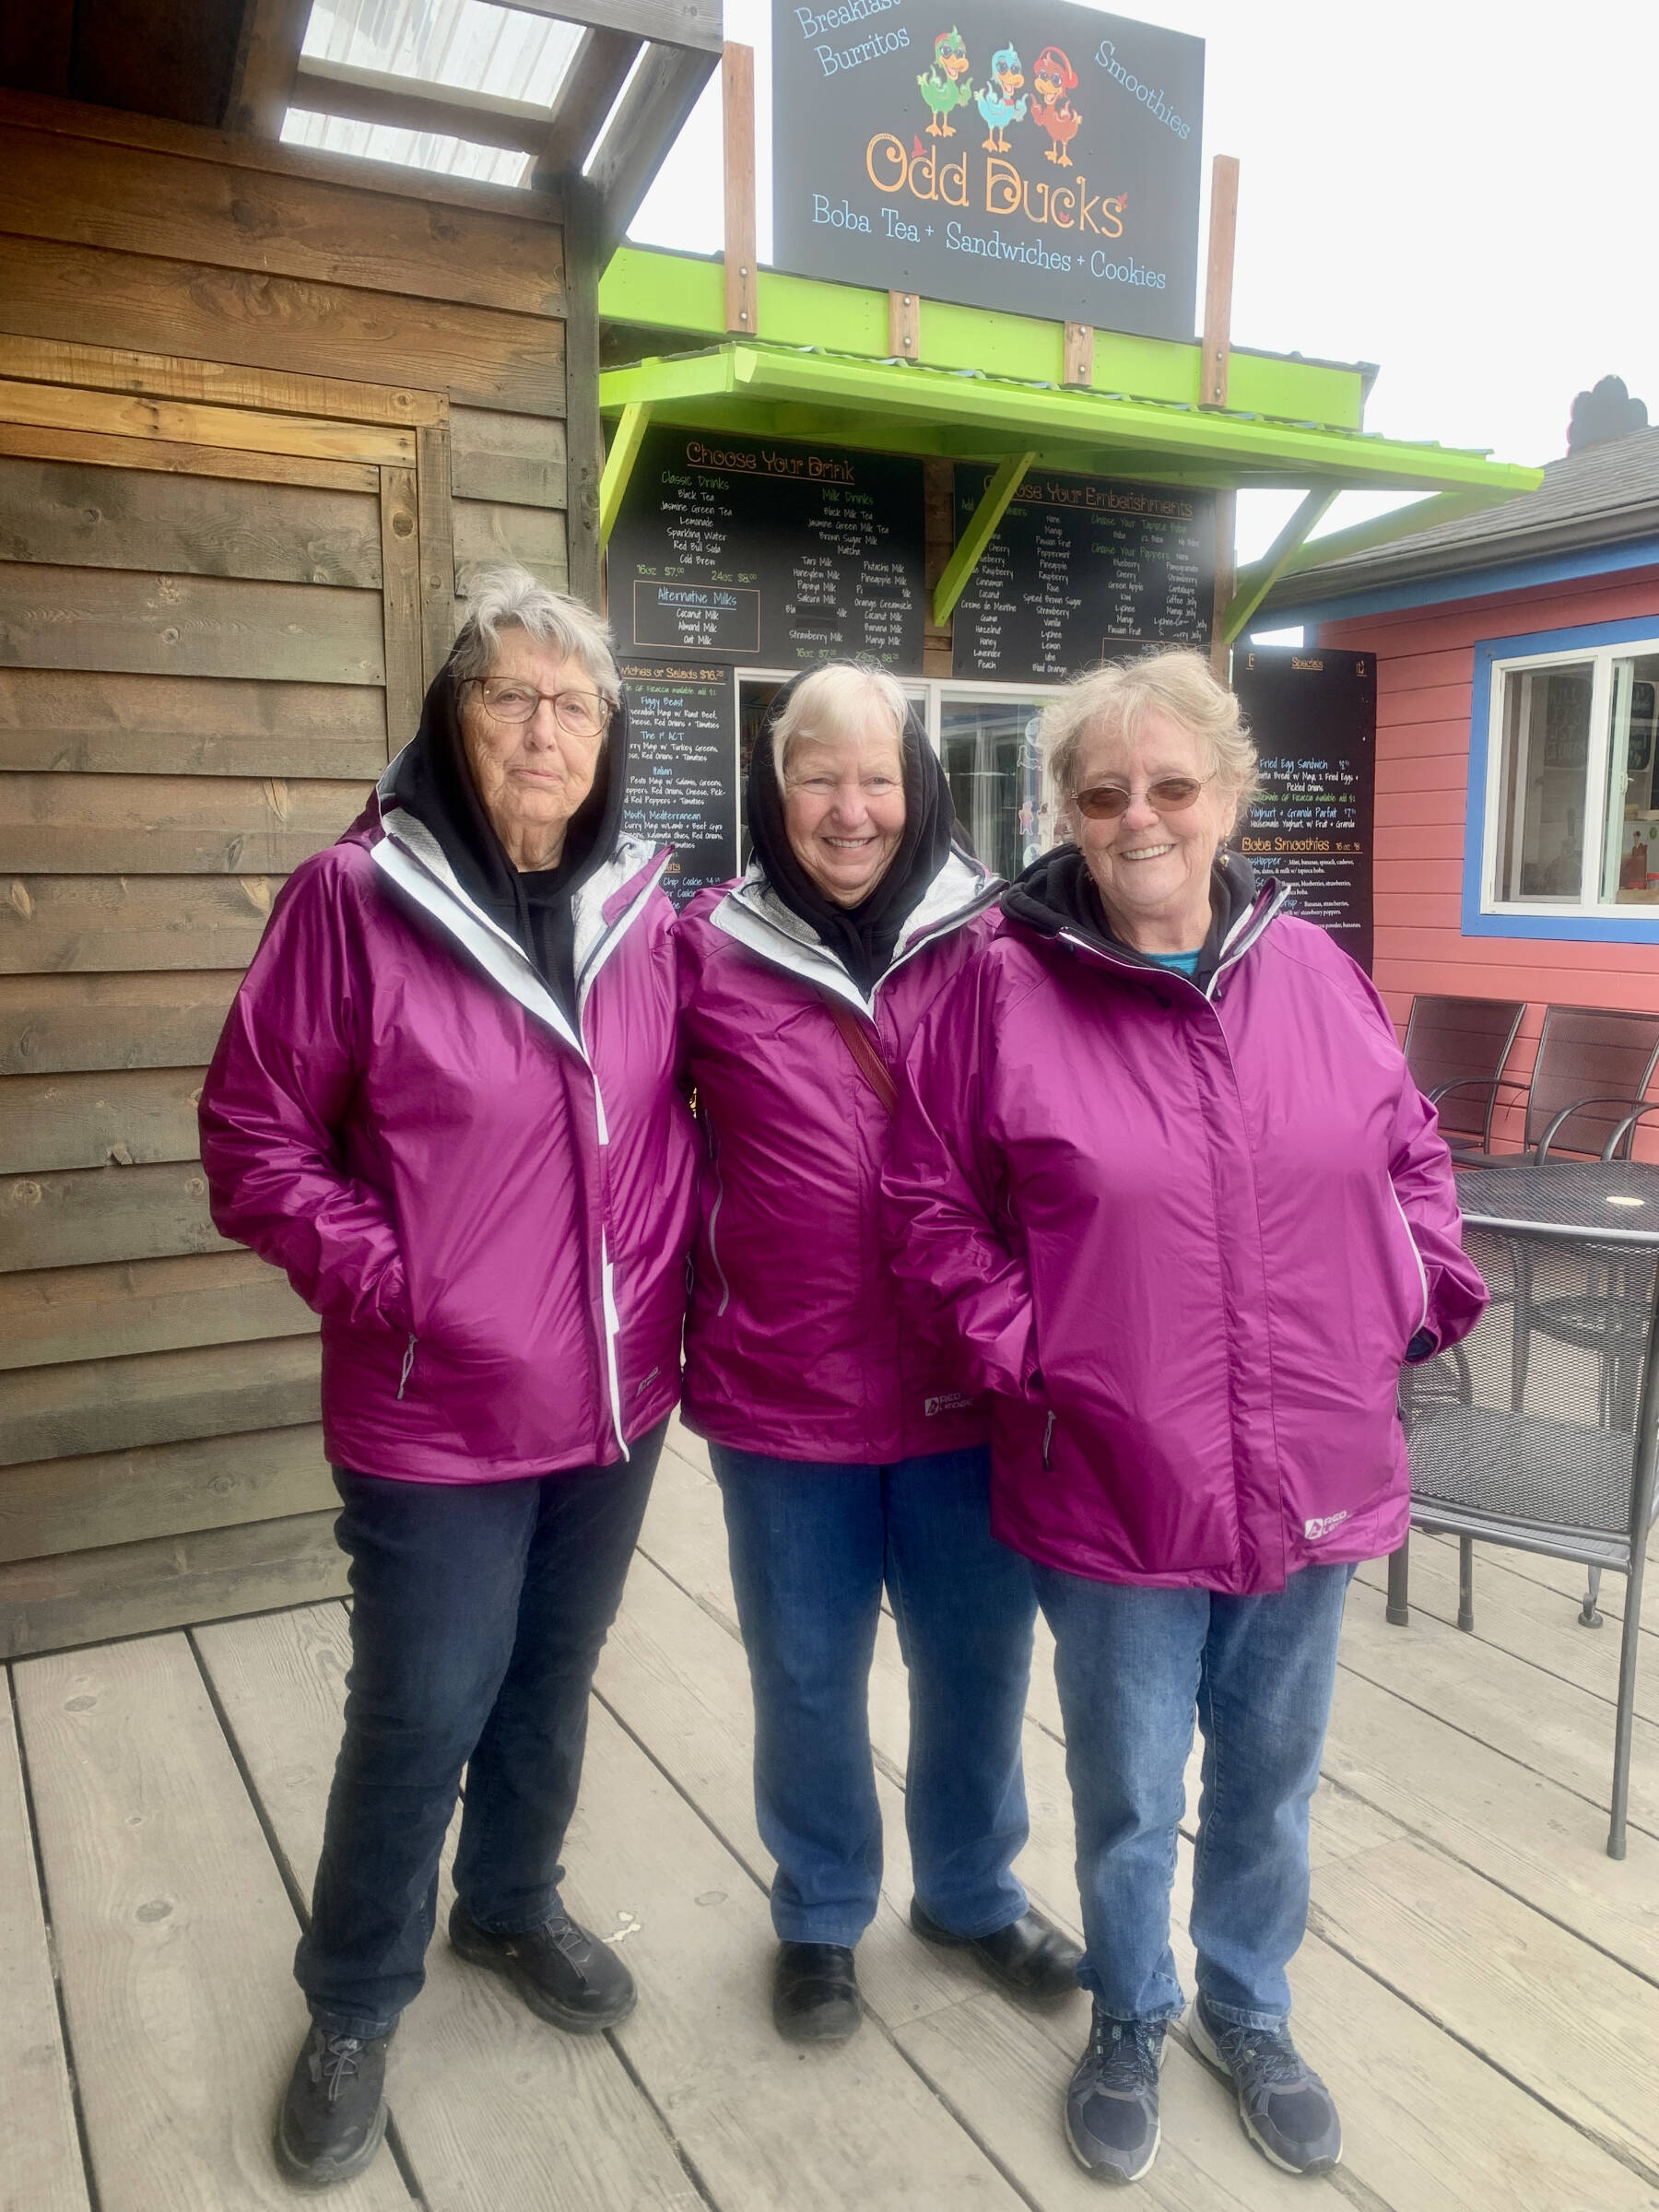 Former longtime community member Pat Melone (left), now living in Port Angeles, Washington, visited the Homer Spit on Friday, June 2, 2023 with friends Cheryl McCurdy and Chris Johnson from her new community. Photo by Christina Whiting